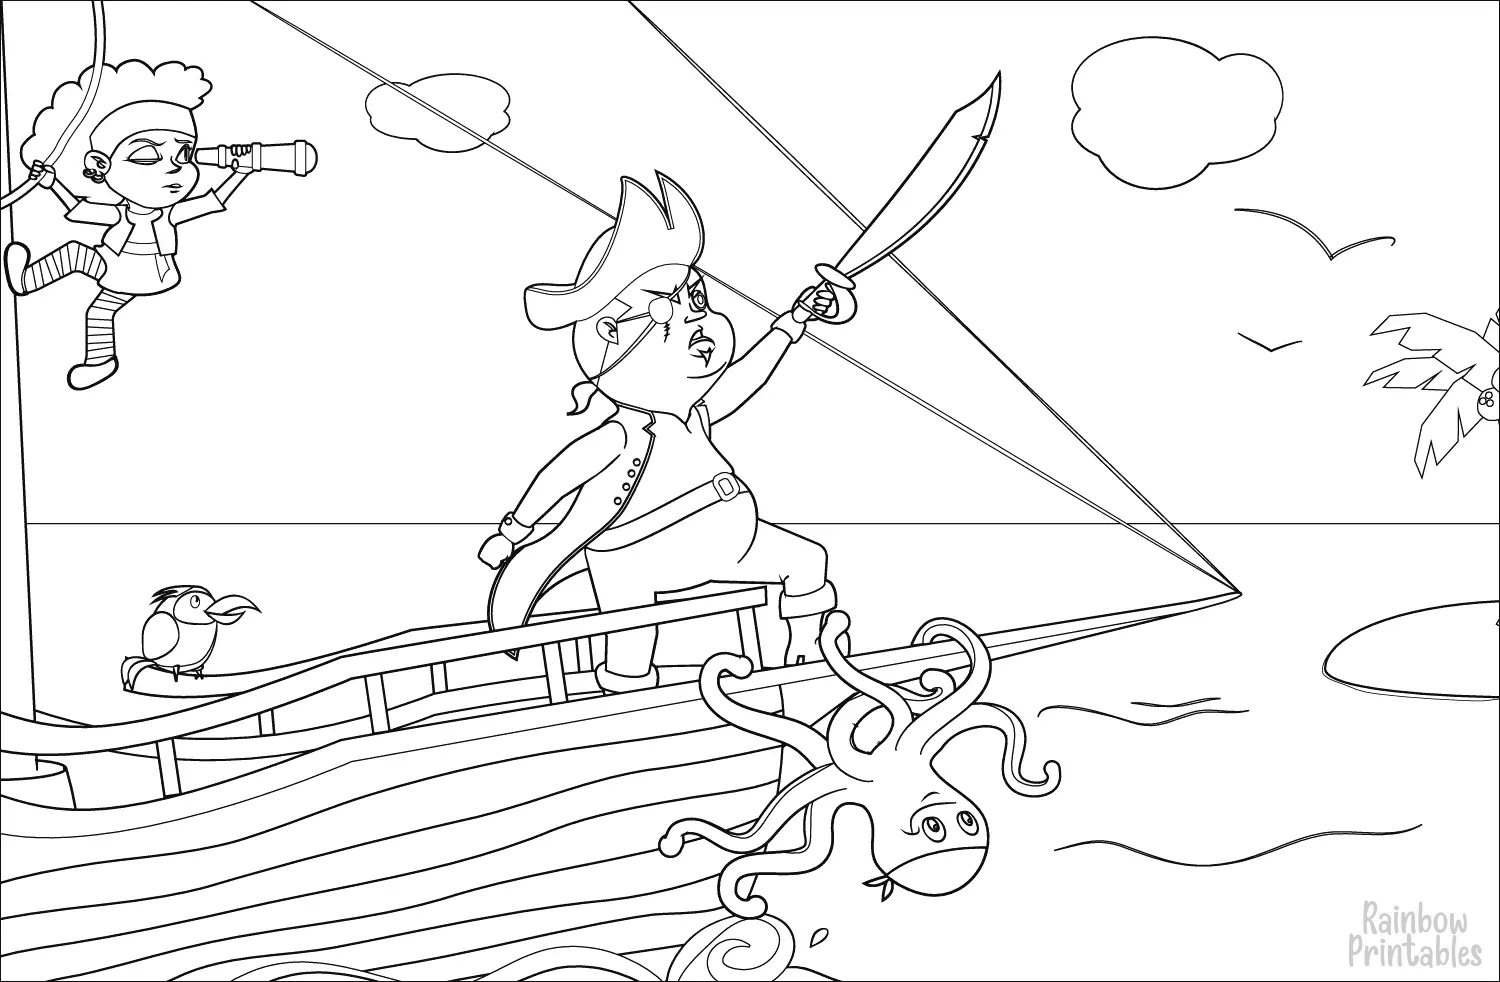 PIRATE-BOAT-Sea-animals-scene-cartoon-Free Clipart Coloring Pages for Kids Adults Art Activities Line Art